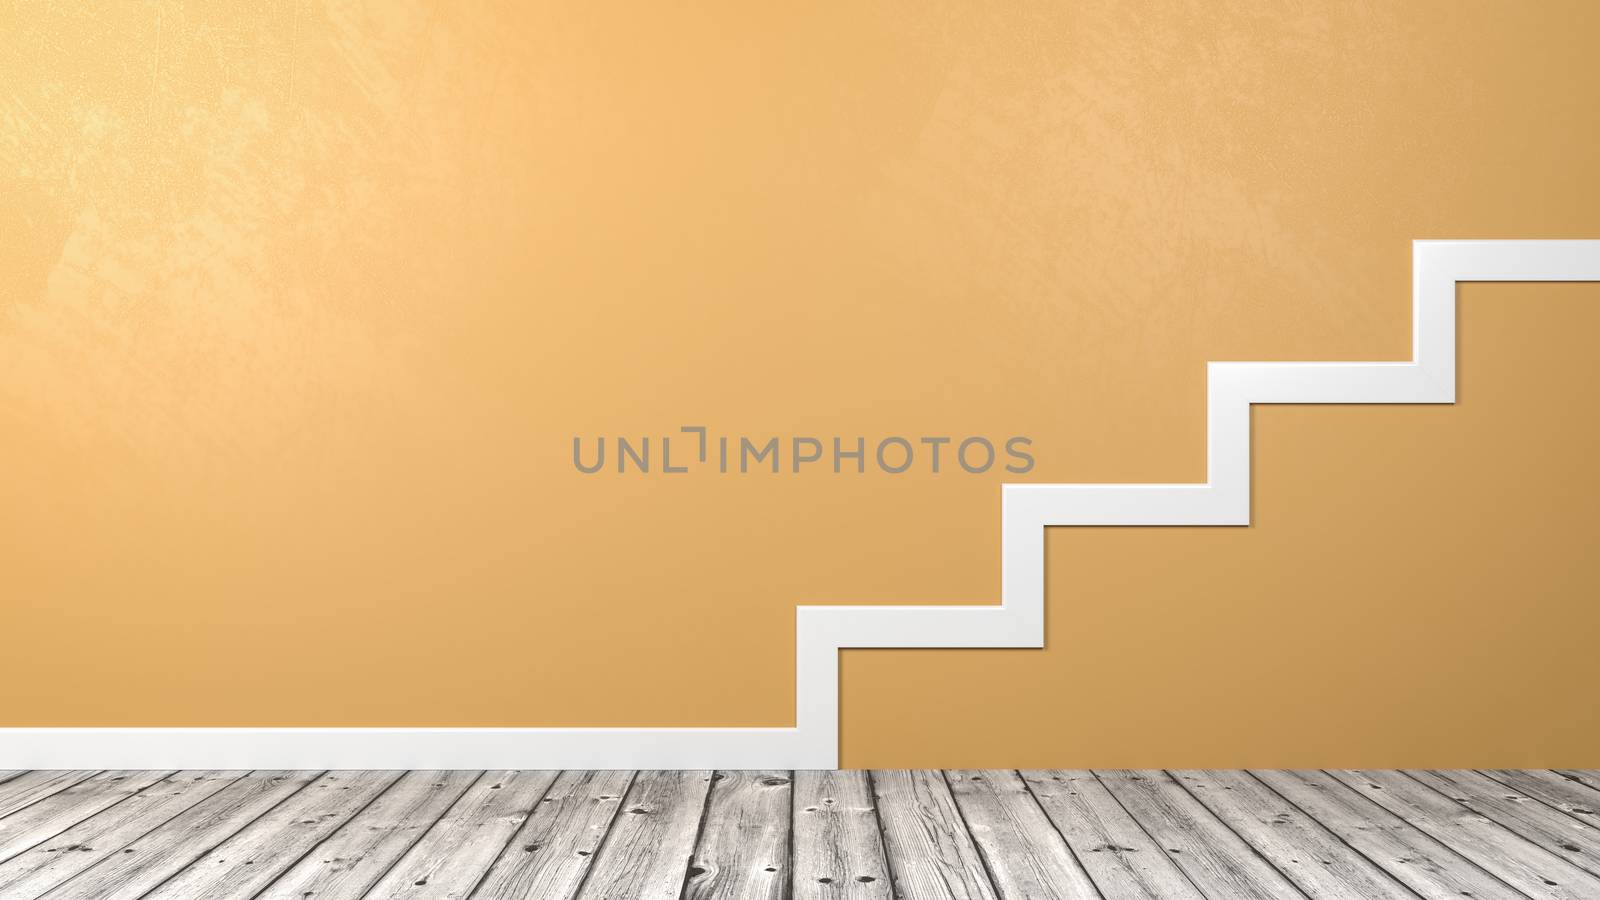 Stairs Outline on Wooden Floor Against Wall by make